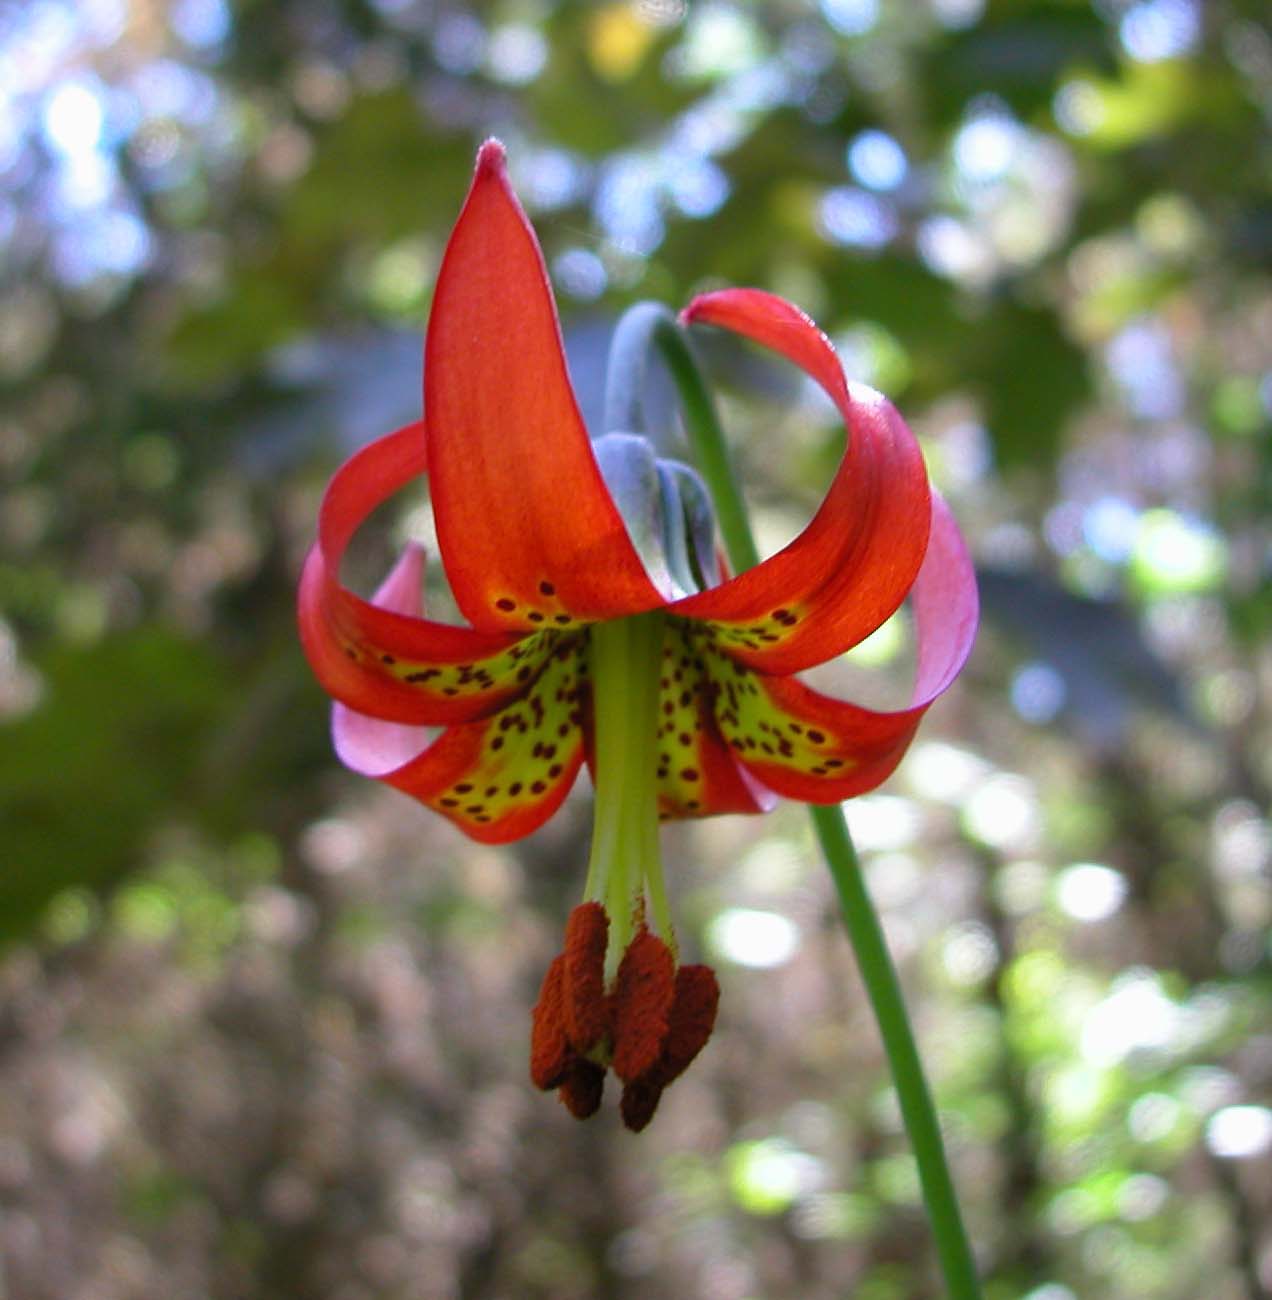 Image of a red lily flower.